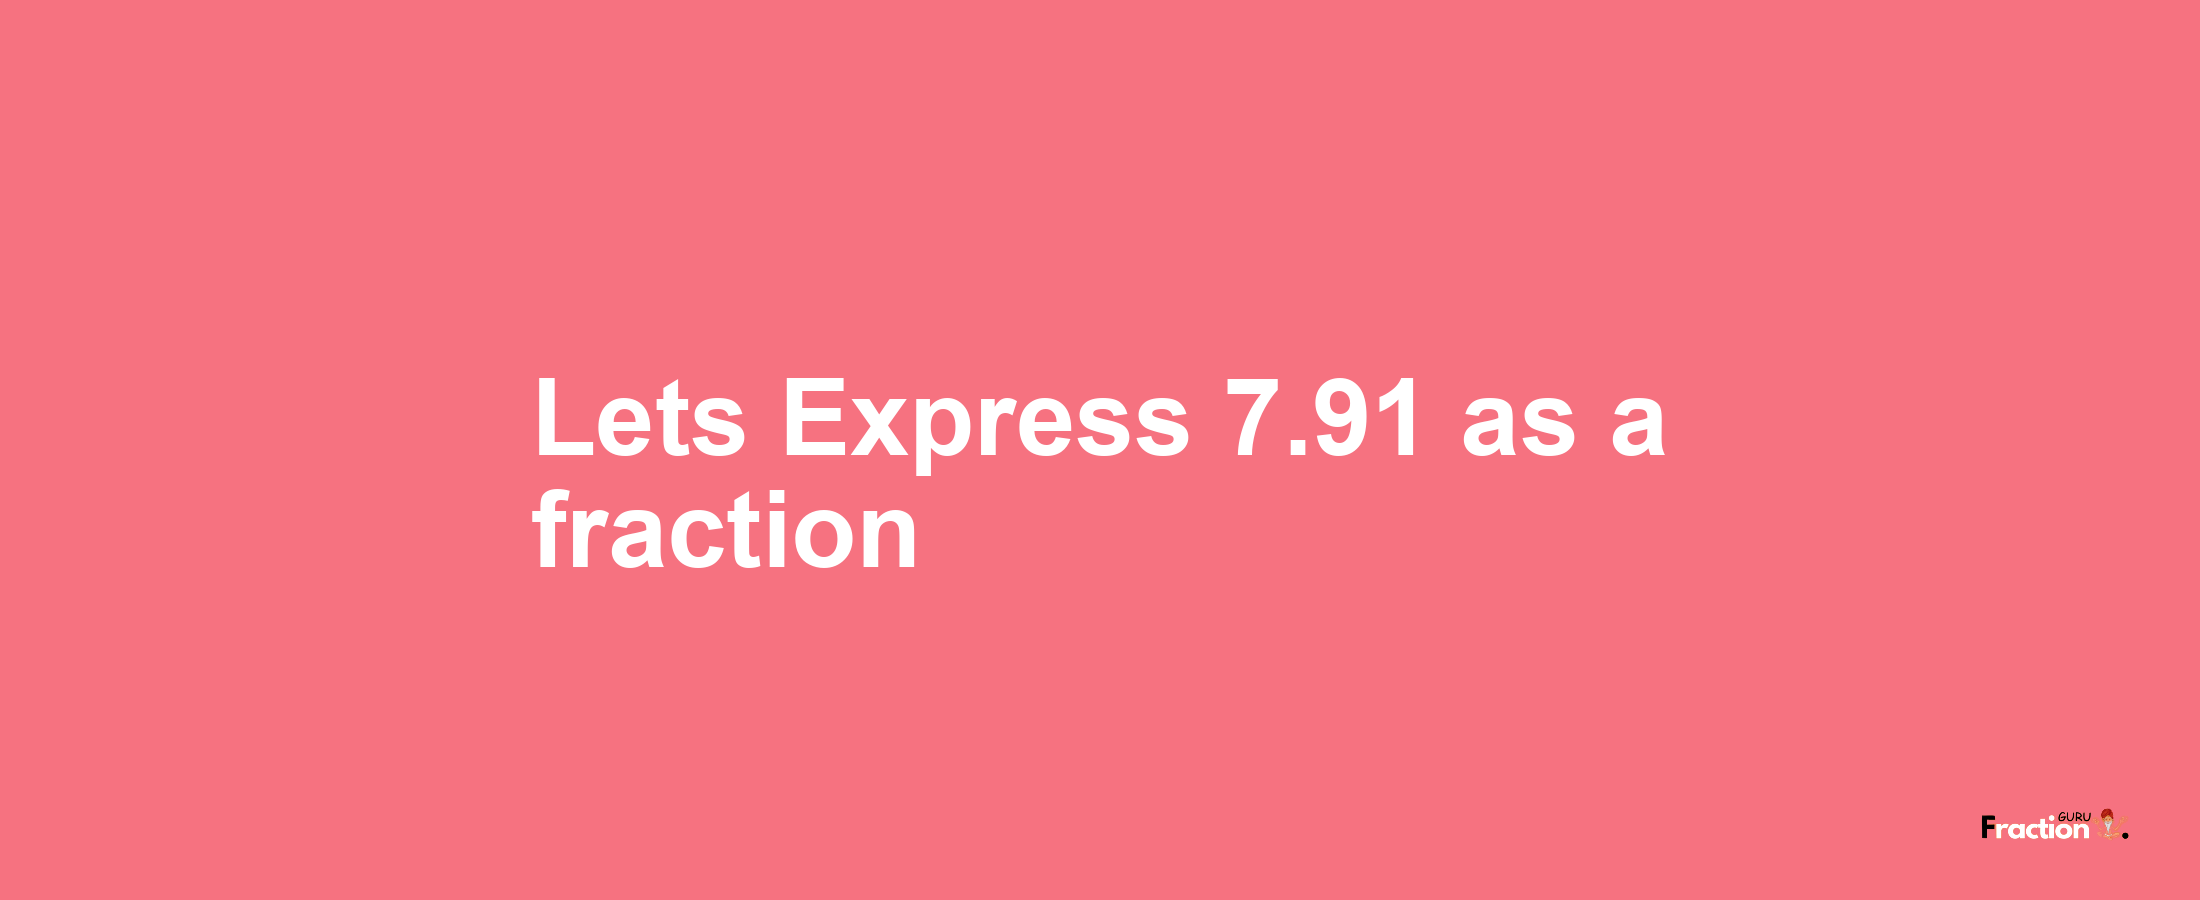 Lets Express 7.91 as afraction